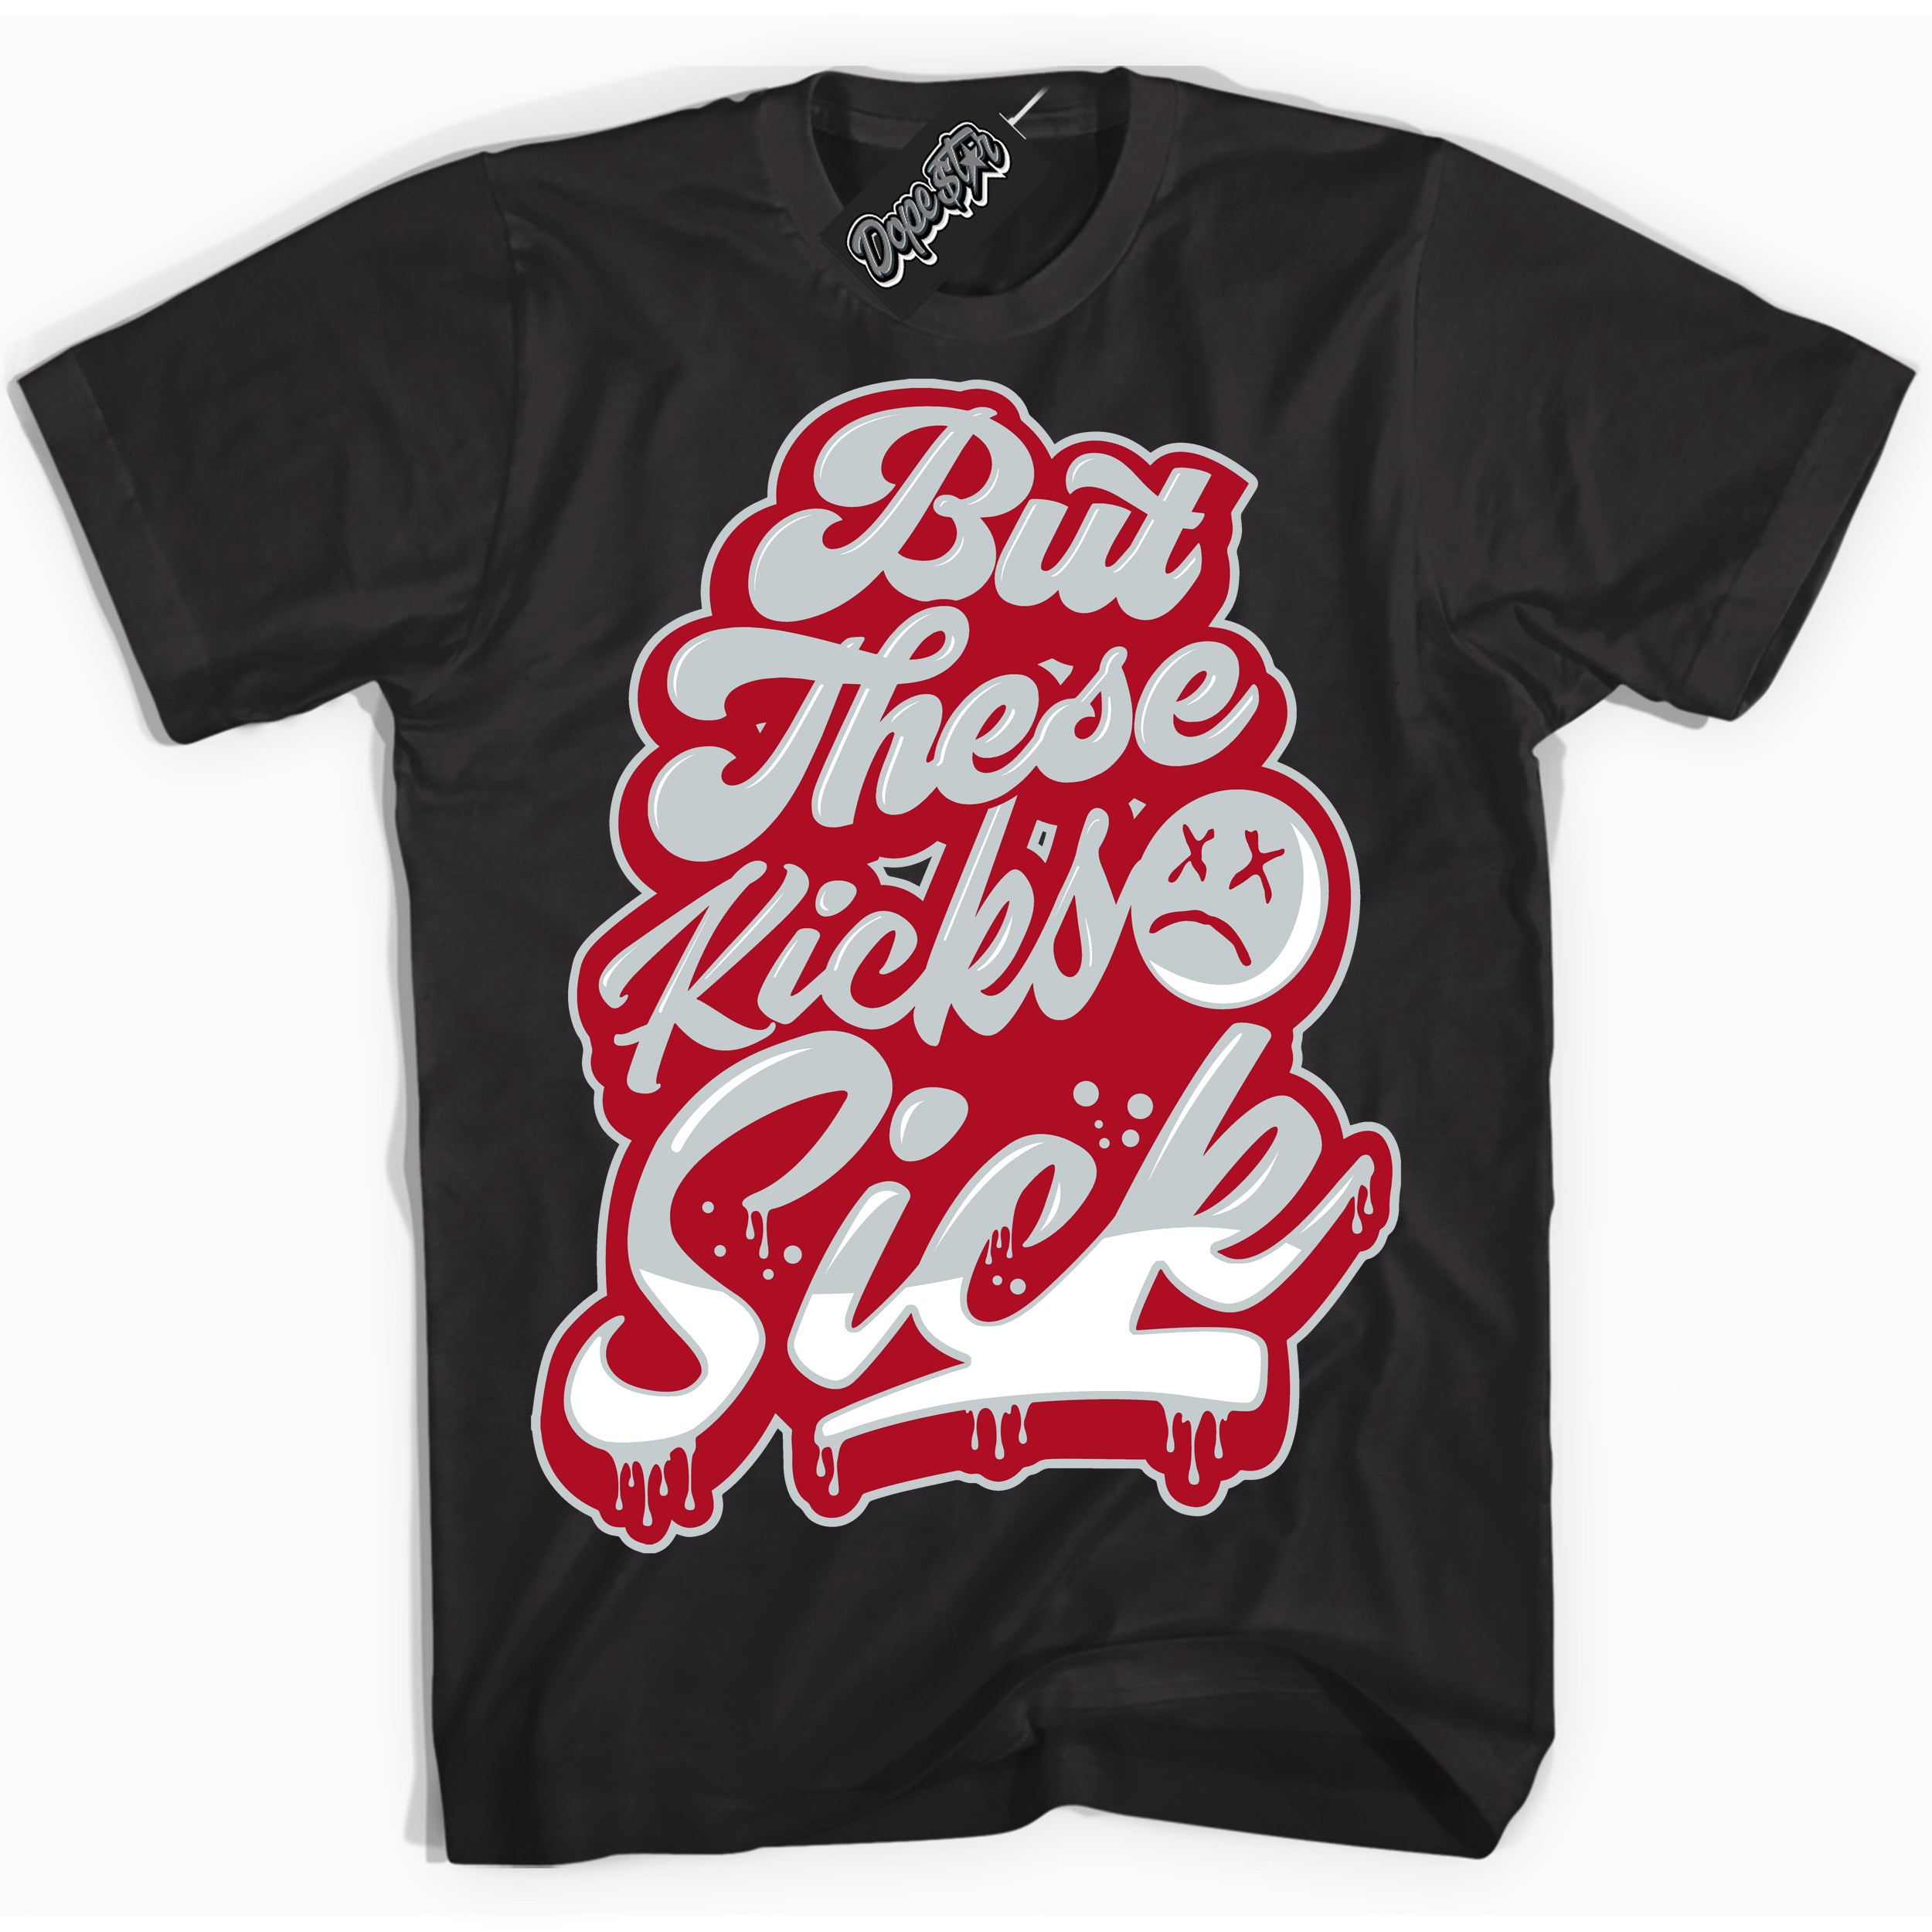 Cool Black Shirt with “ Kick Sick ” design that perfectly matches Reverse Ultraman Sneakers.